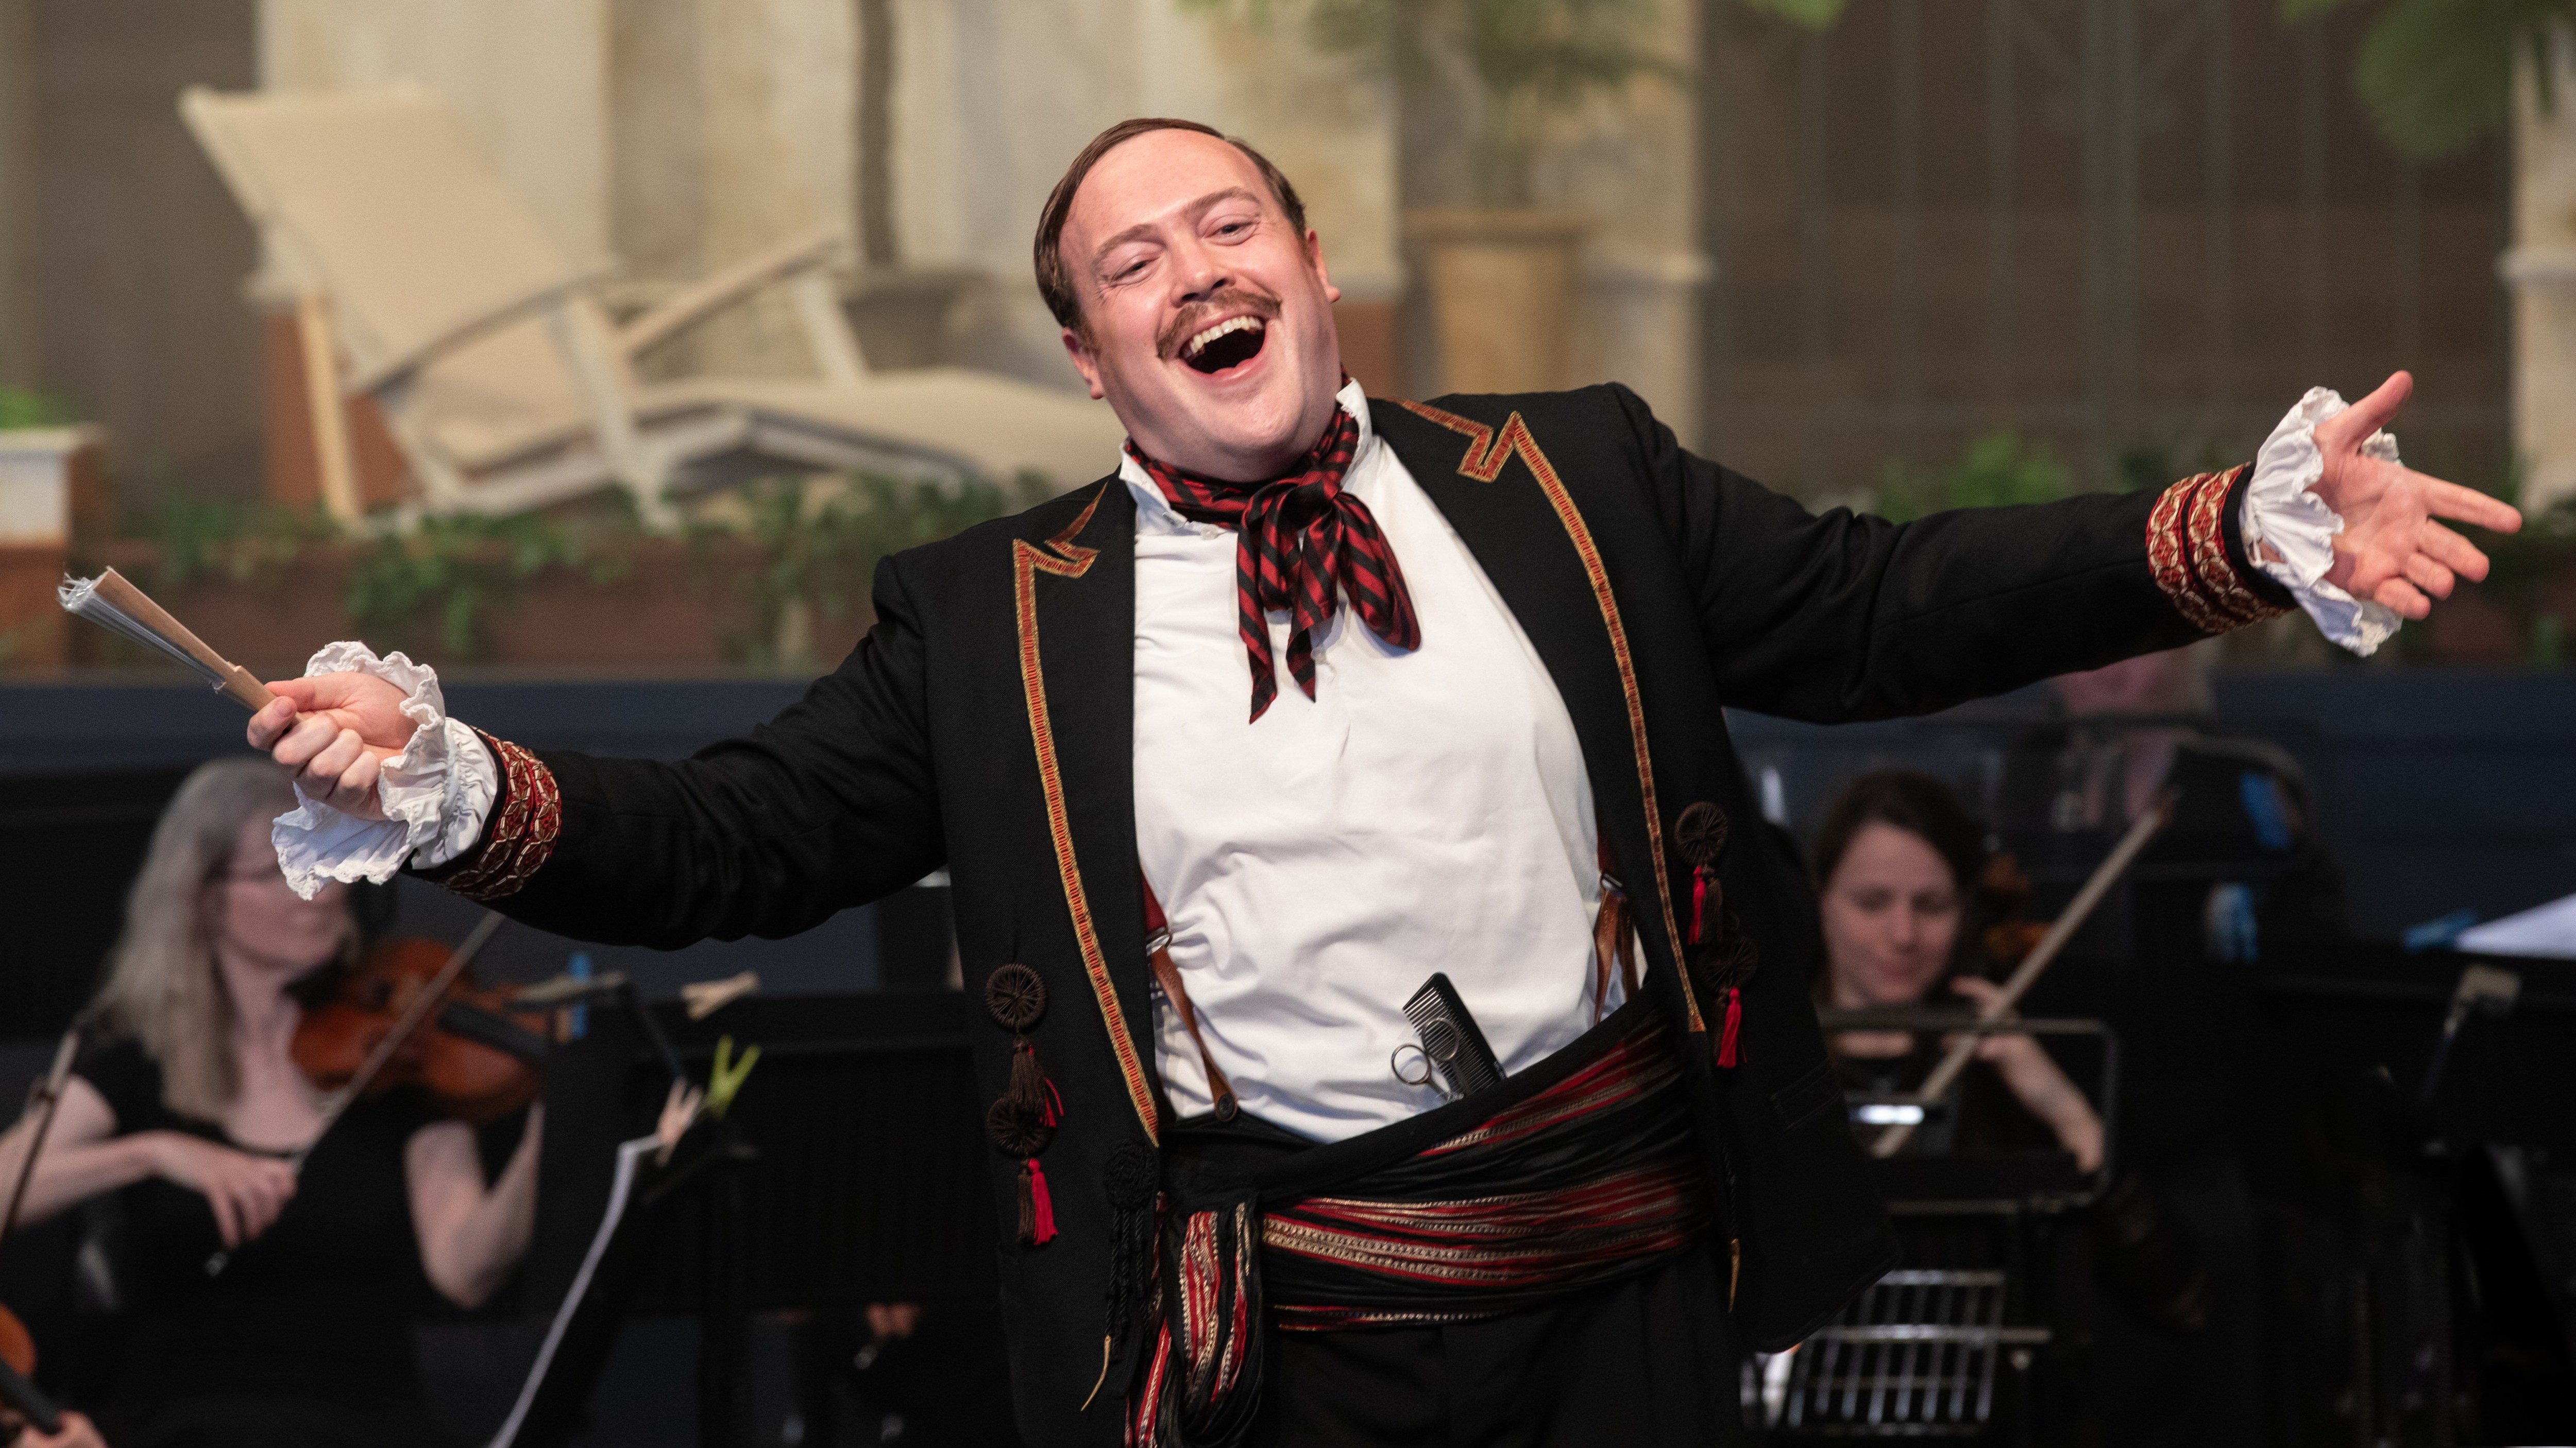 Paul Grant’s Figaro is boisterousness personified